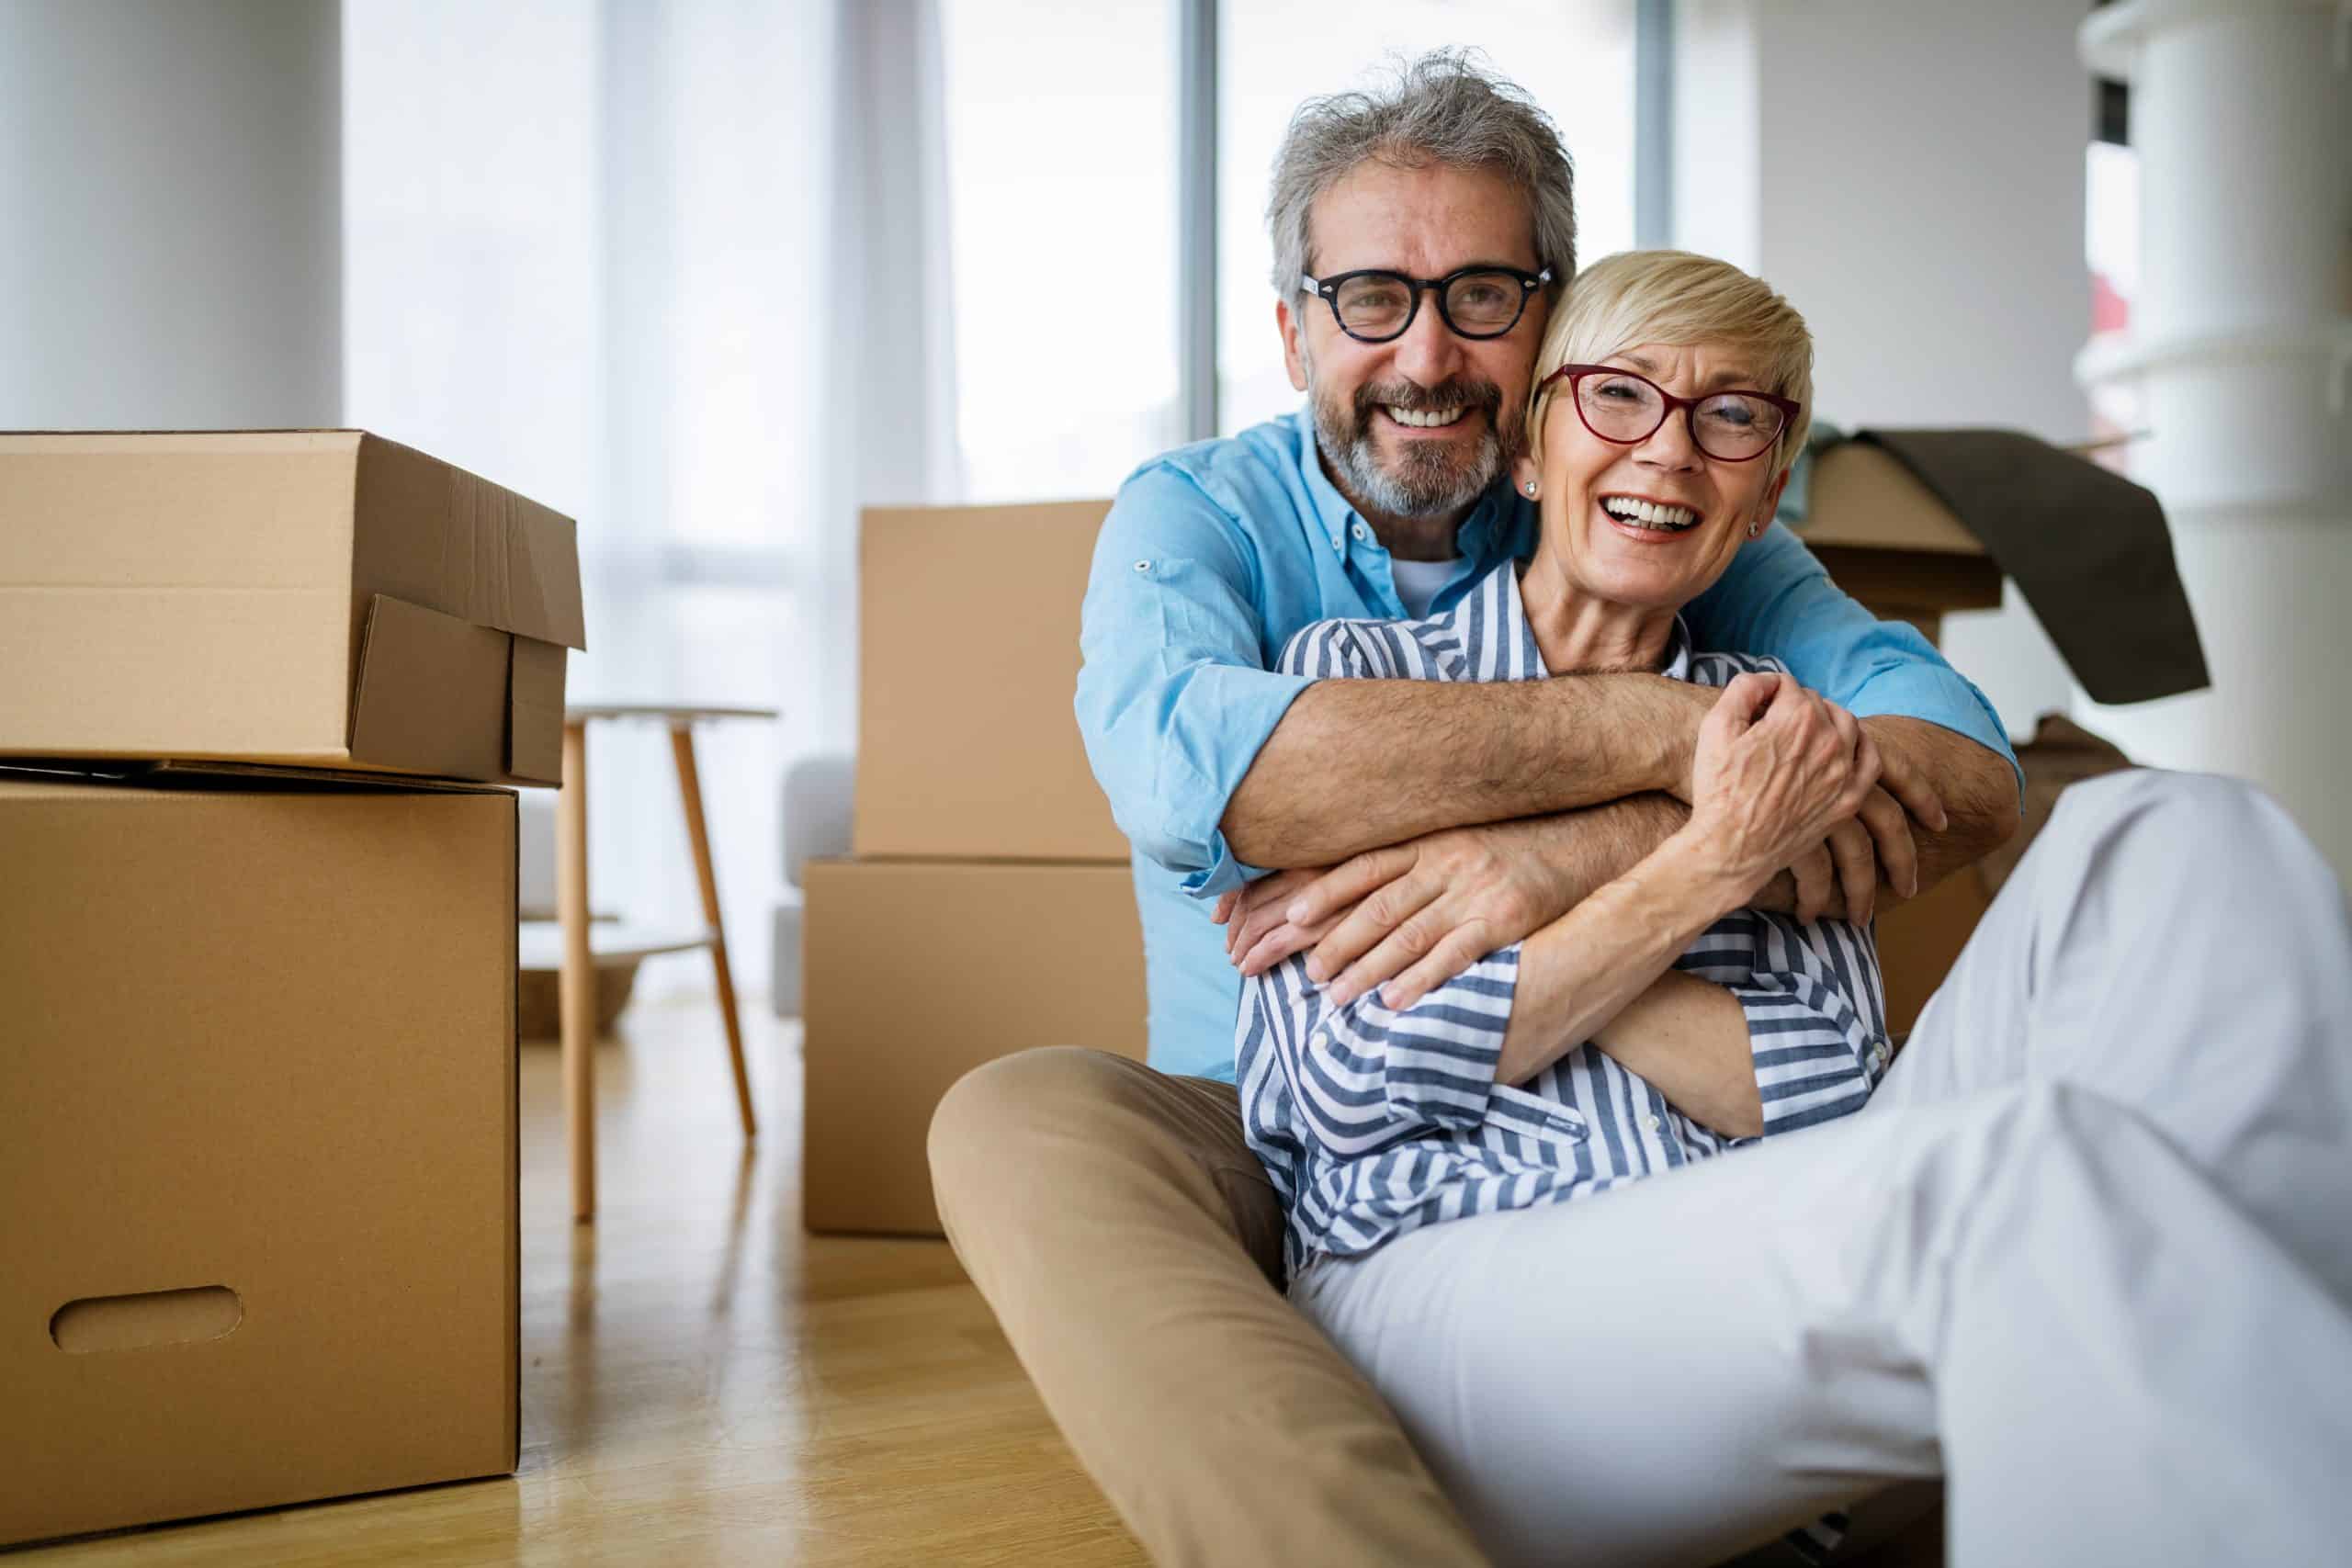 Man and woman sitting next to moving boxes